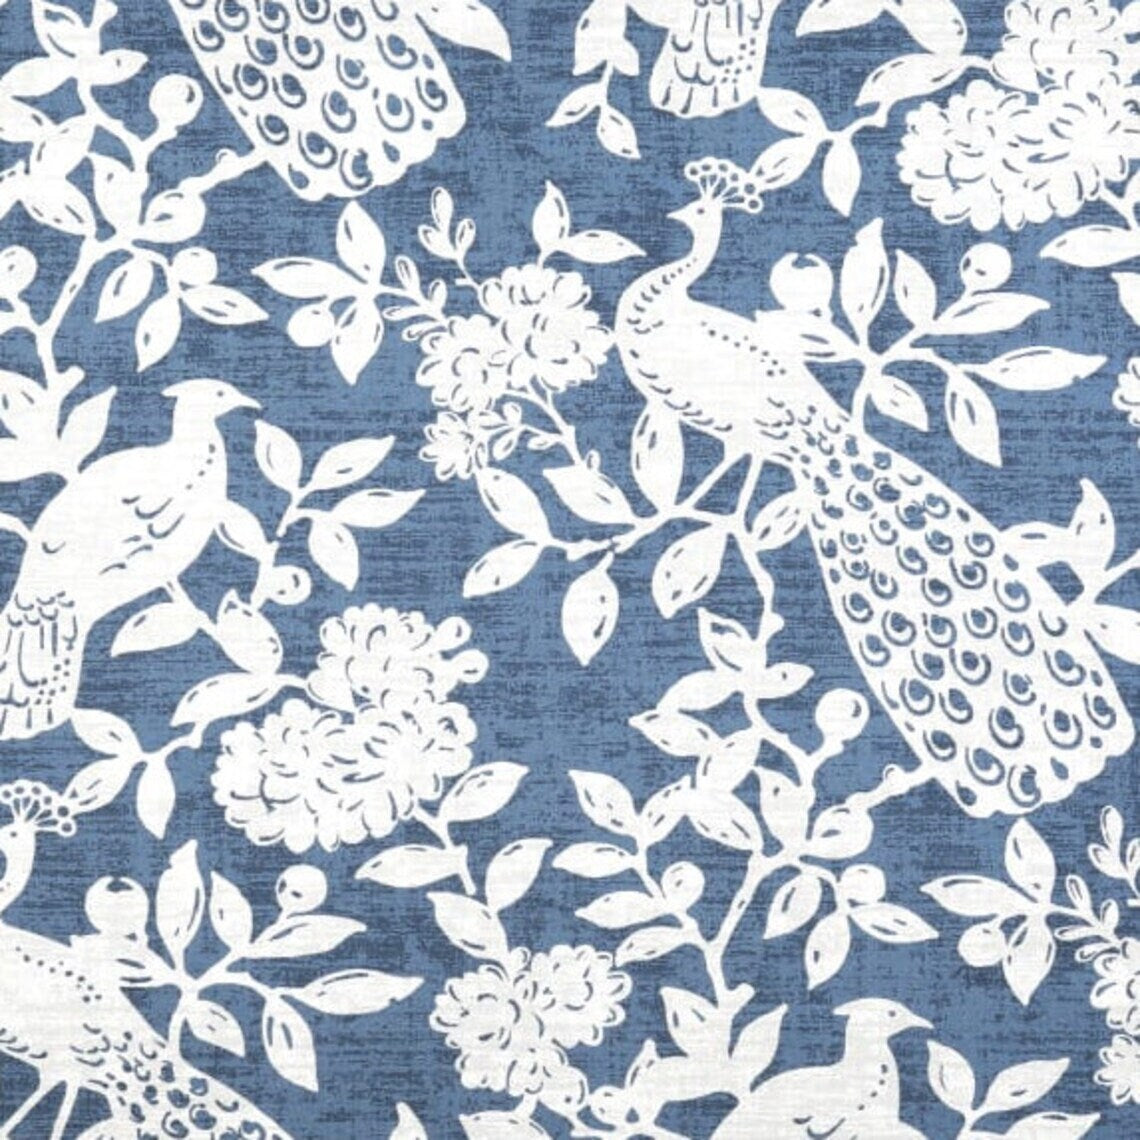 pinch pleated curtain panels pair in birdsong navy blue bird toile, large scale